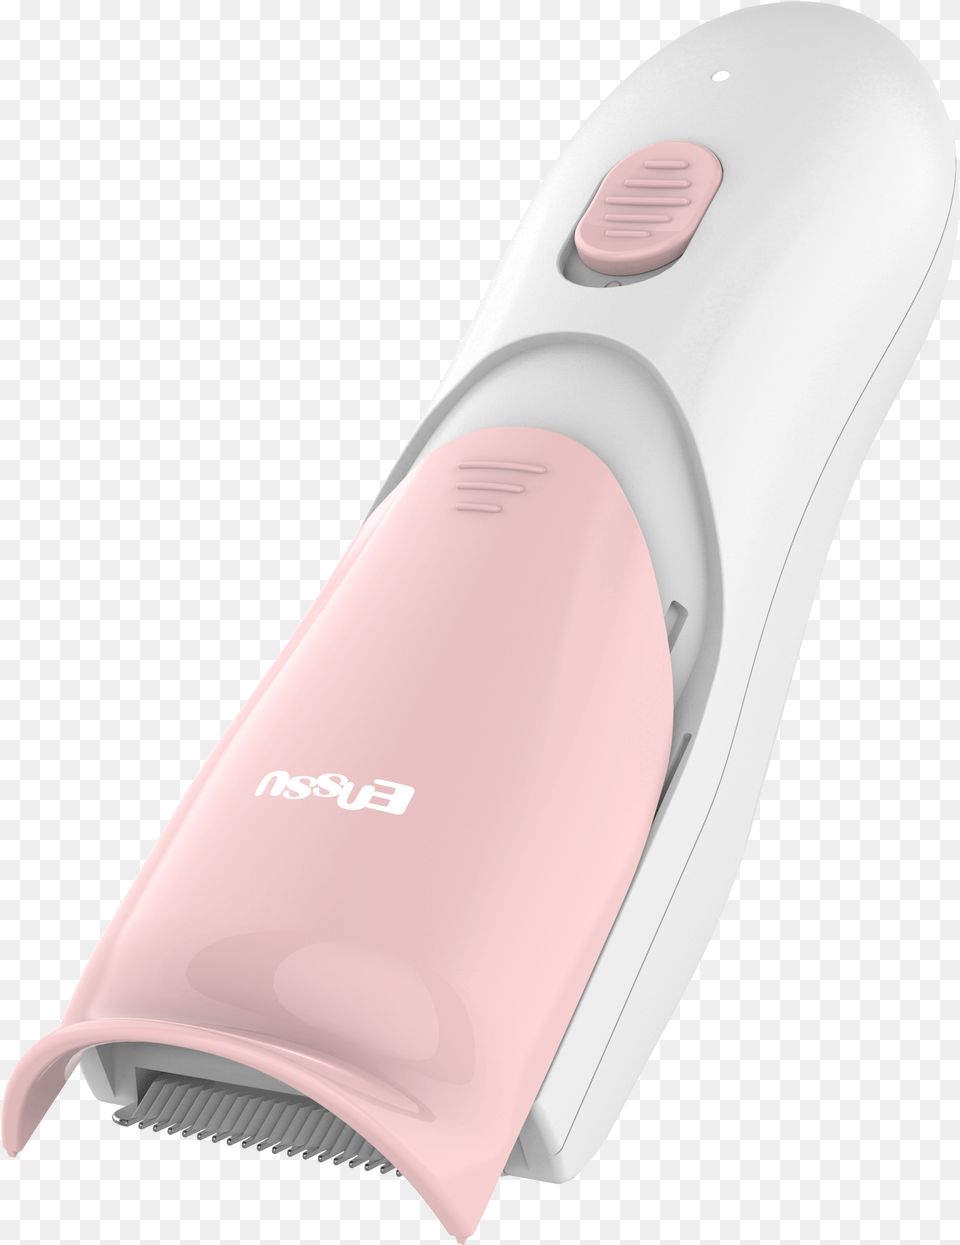 Enssu Vacuum Hair Trimmer Nail, Device, Electrical Device, Appliance Free Transparent Png